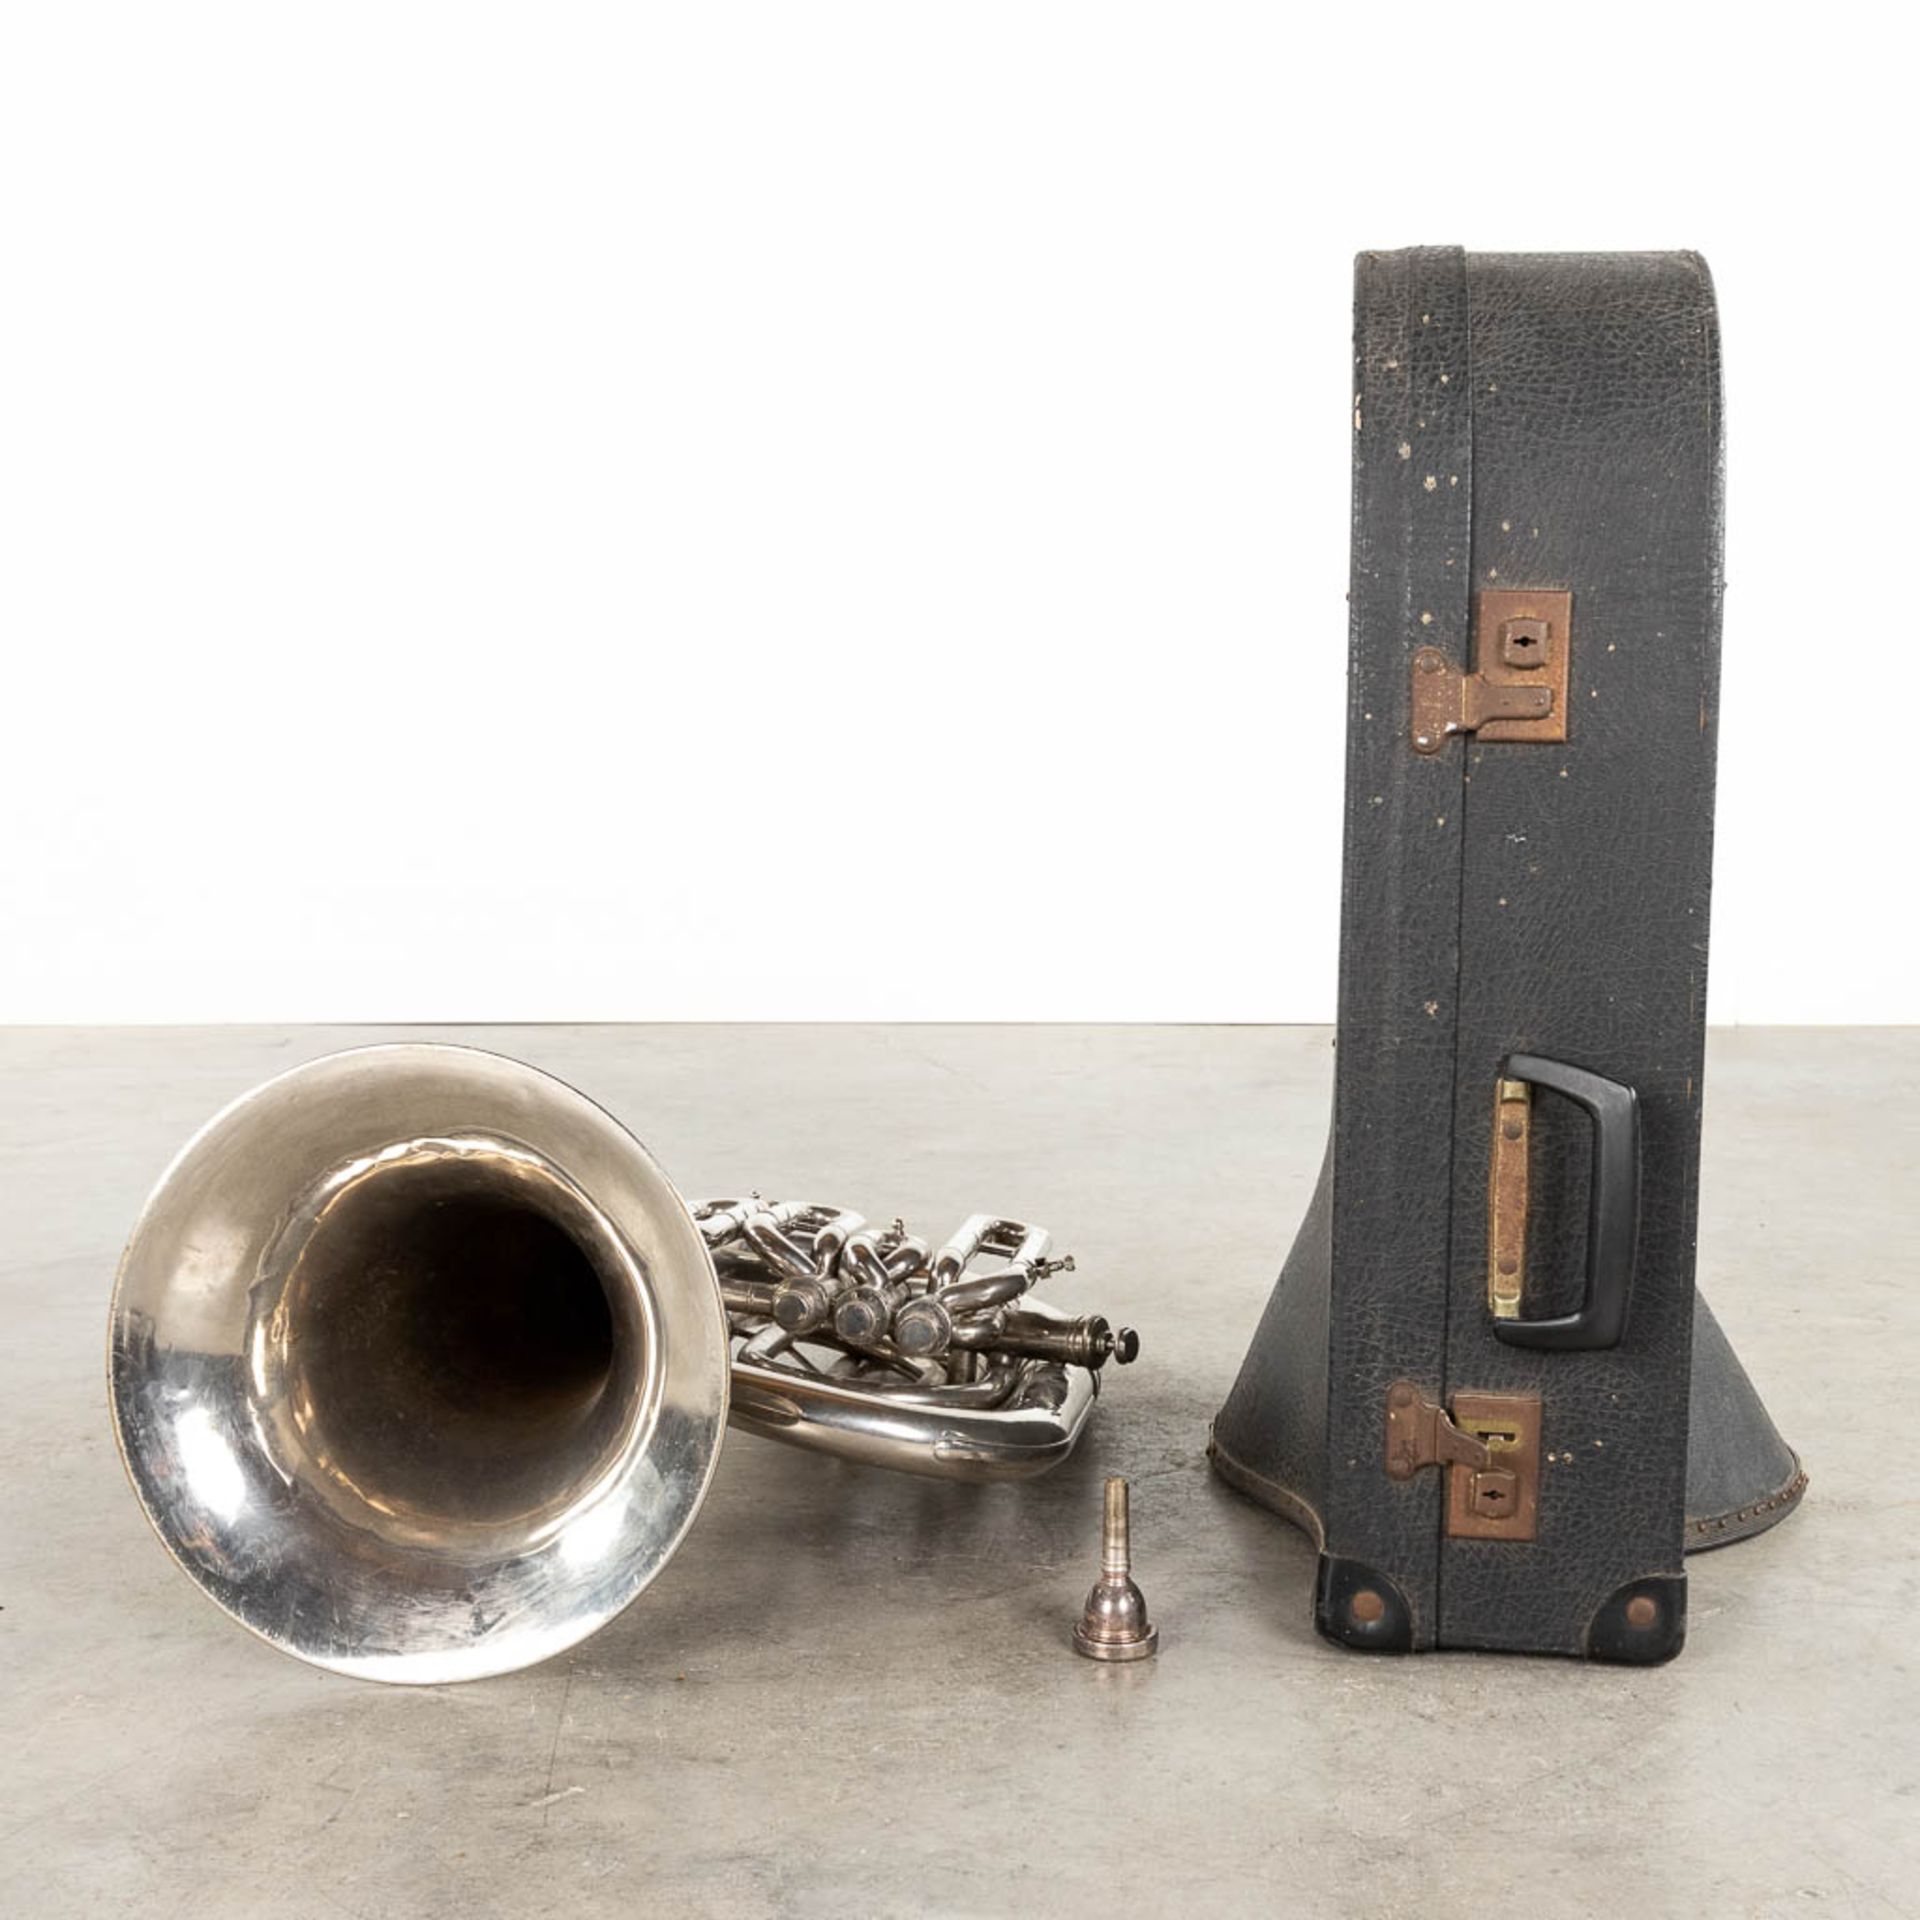 A Brass Tuba, Musical Instrument. The Netherlands, 20th C. (D:47 x W:65 x H:33 cm) - Image 12 of 12